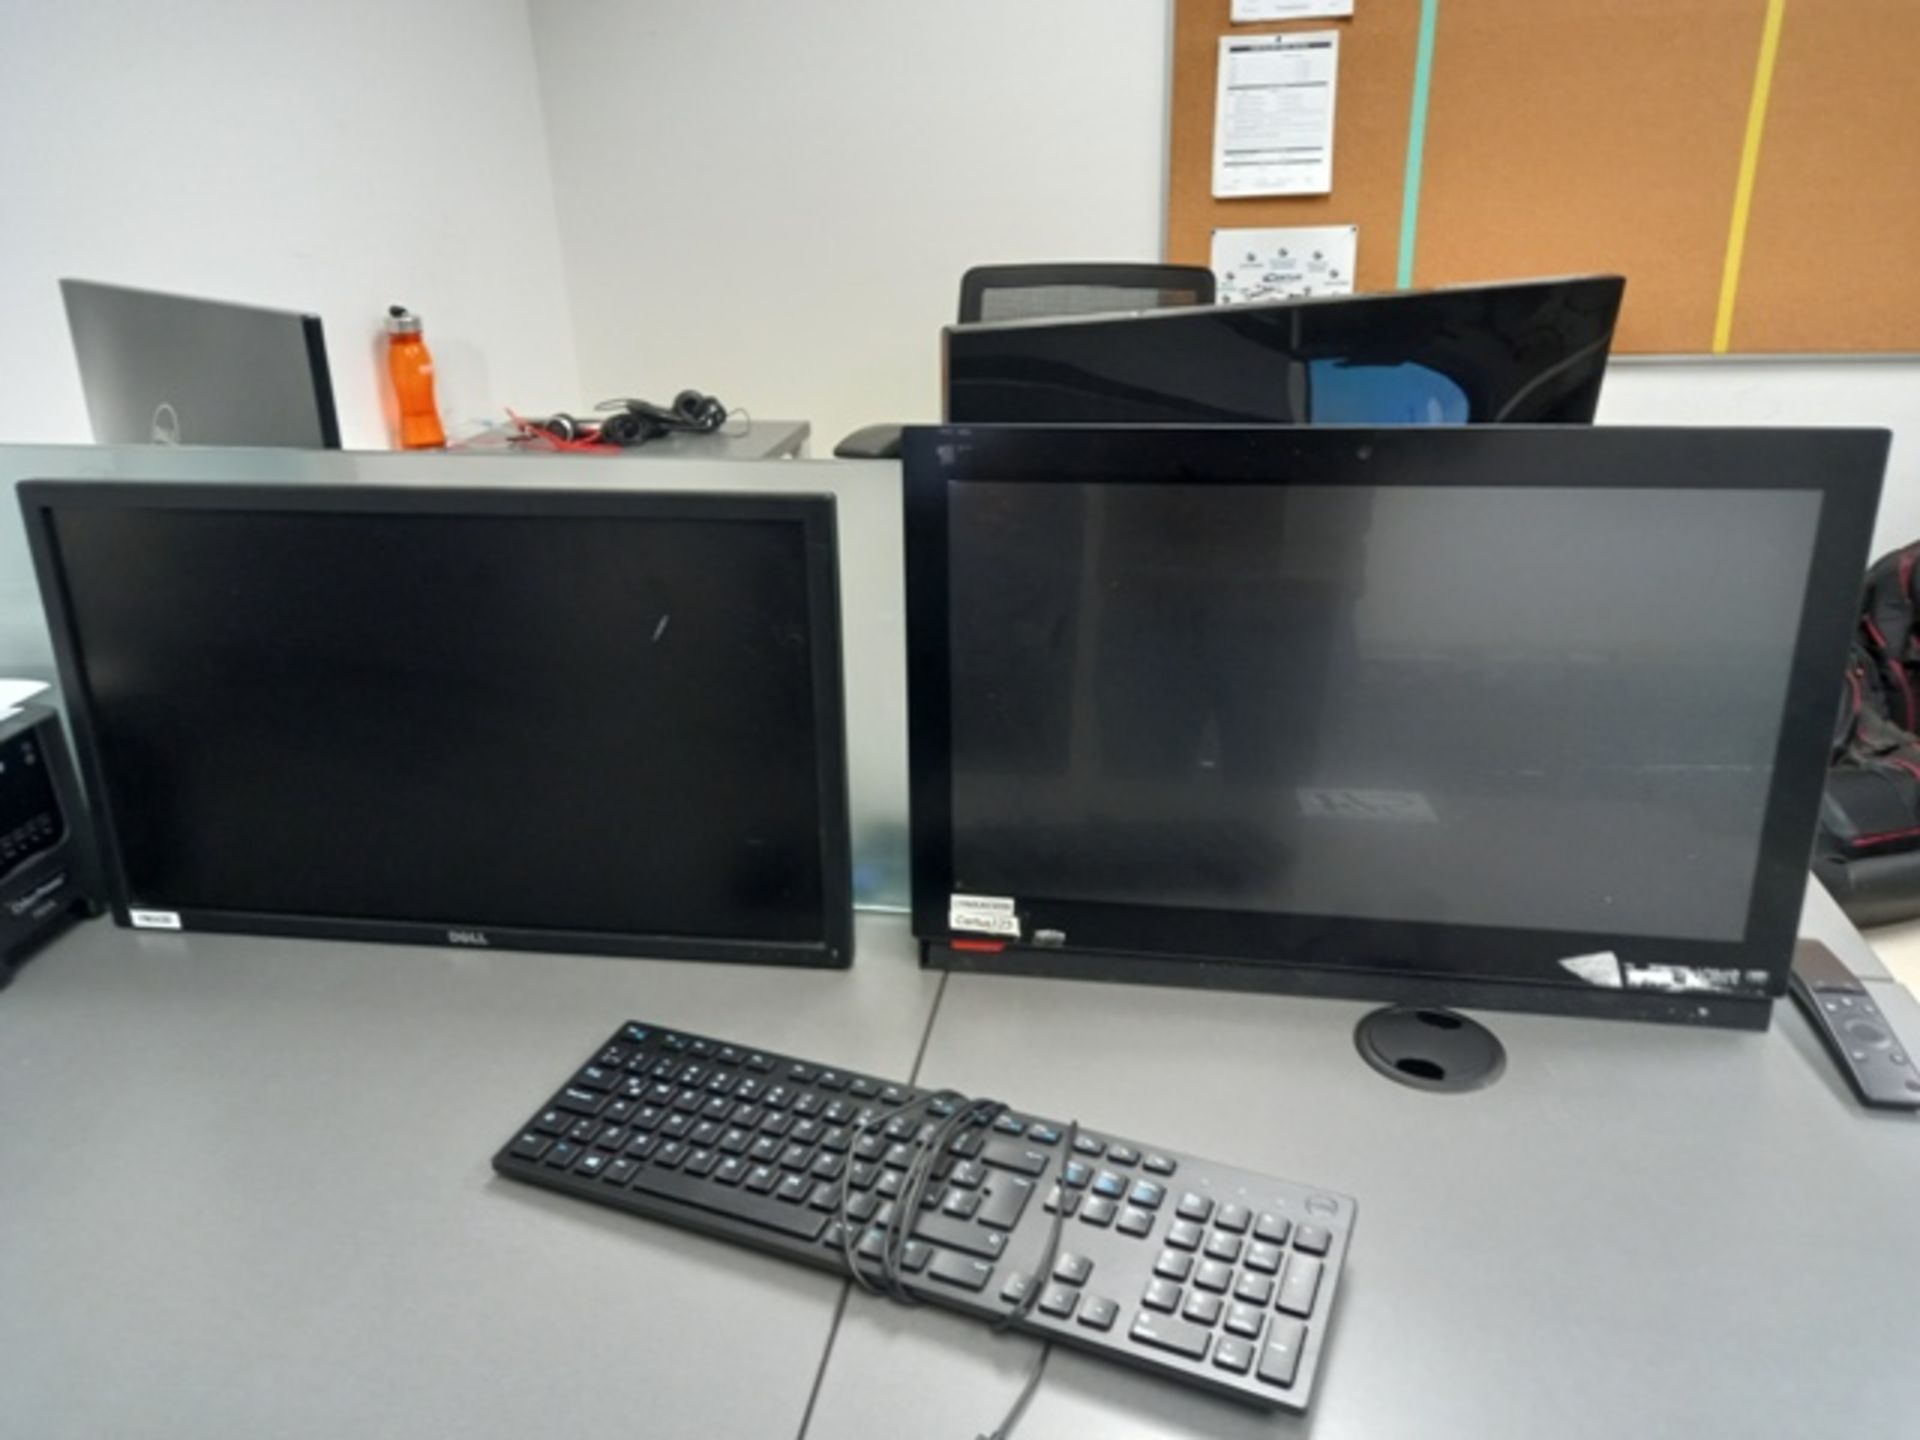 (29) Pcs Office Furniture and Computer Equipment Consisting of: (2) 2 Person Work Stations and more - Image 26 of 33